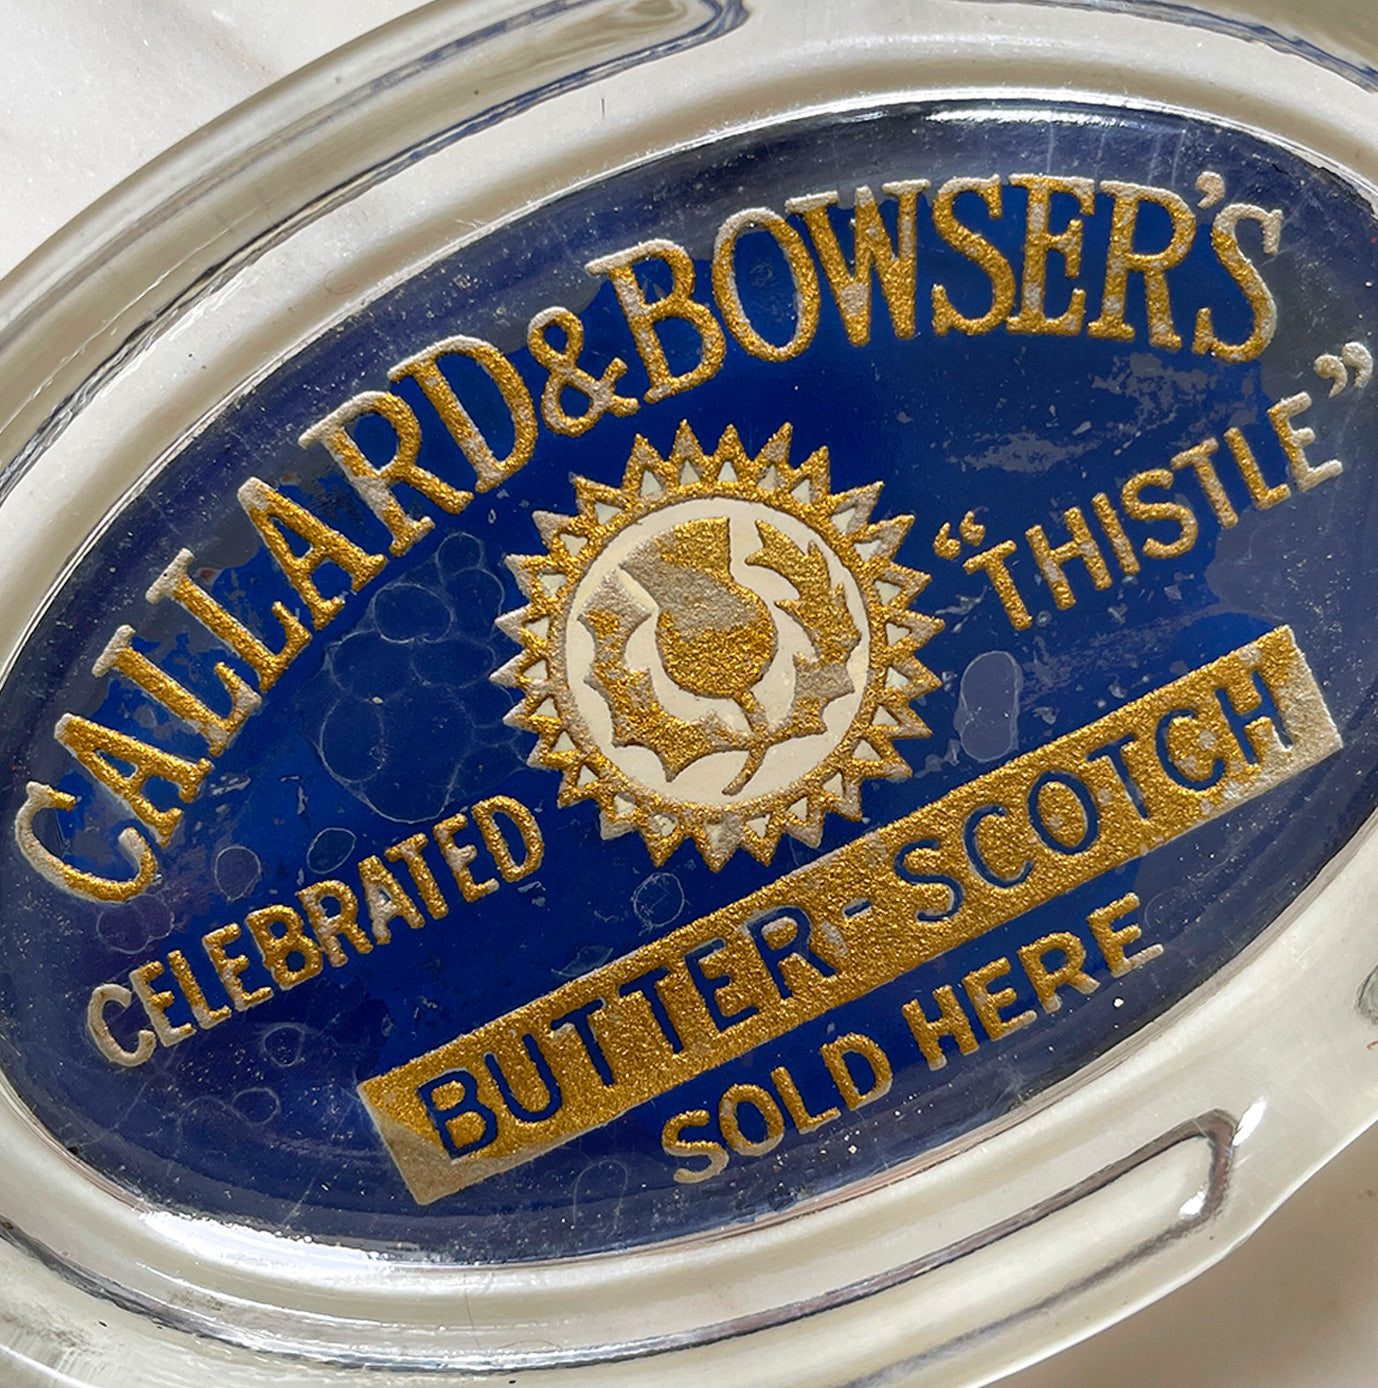 A Glass Callard & Bowser's Celebrated Thistle Butter Scotch Advertising Ashtray with nice gold and blue typography and thistle graphic - SHOP NOW - www.intovintage.co.uk